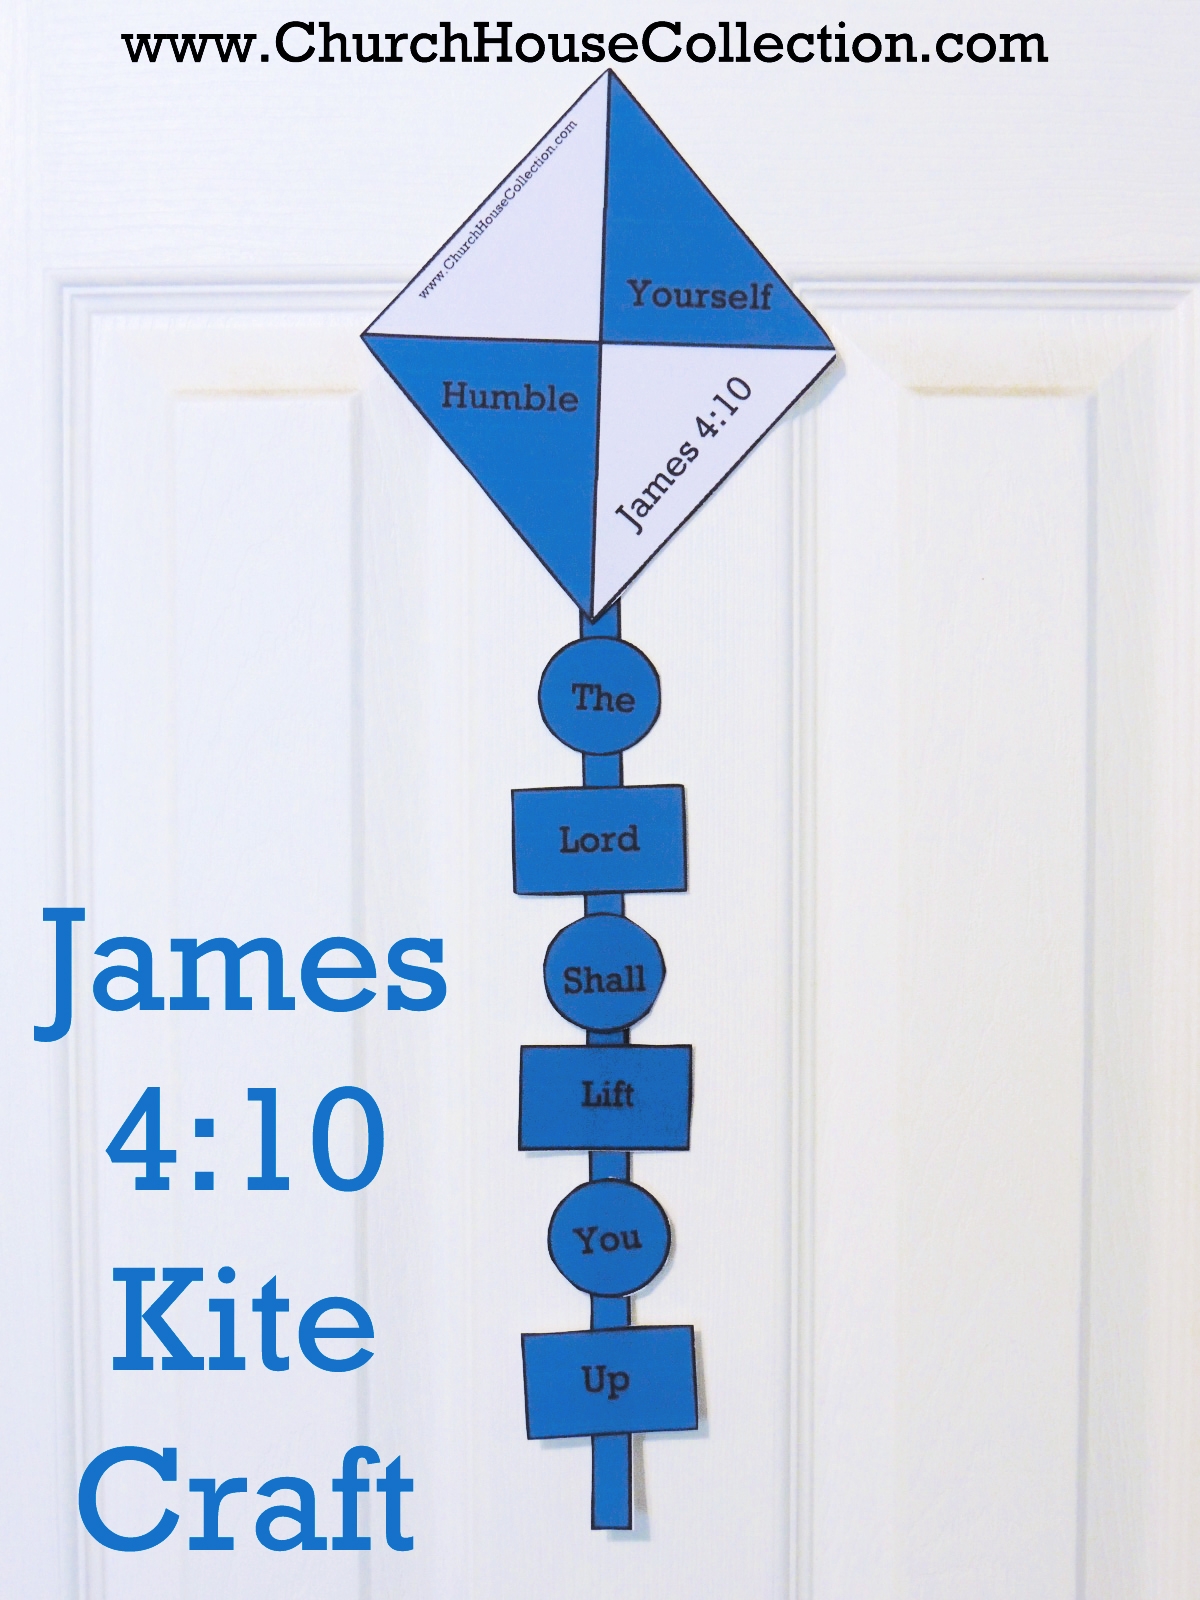 Church House Collection Blog Kite Cutout Craft For Sunday School Kids James 4 10 Free Printable Template Pattern To Print Out For Summer Crafts Children s Church By Church House Collection - Free Printable Bible Crafts